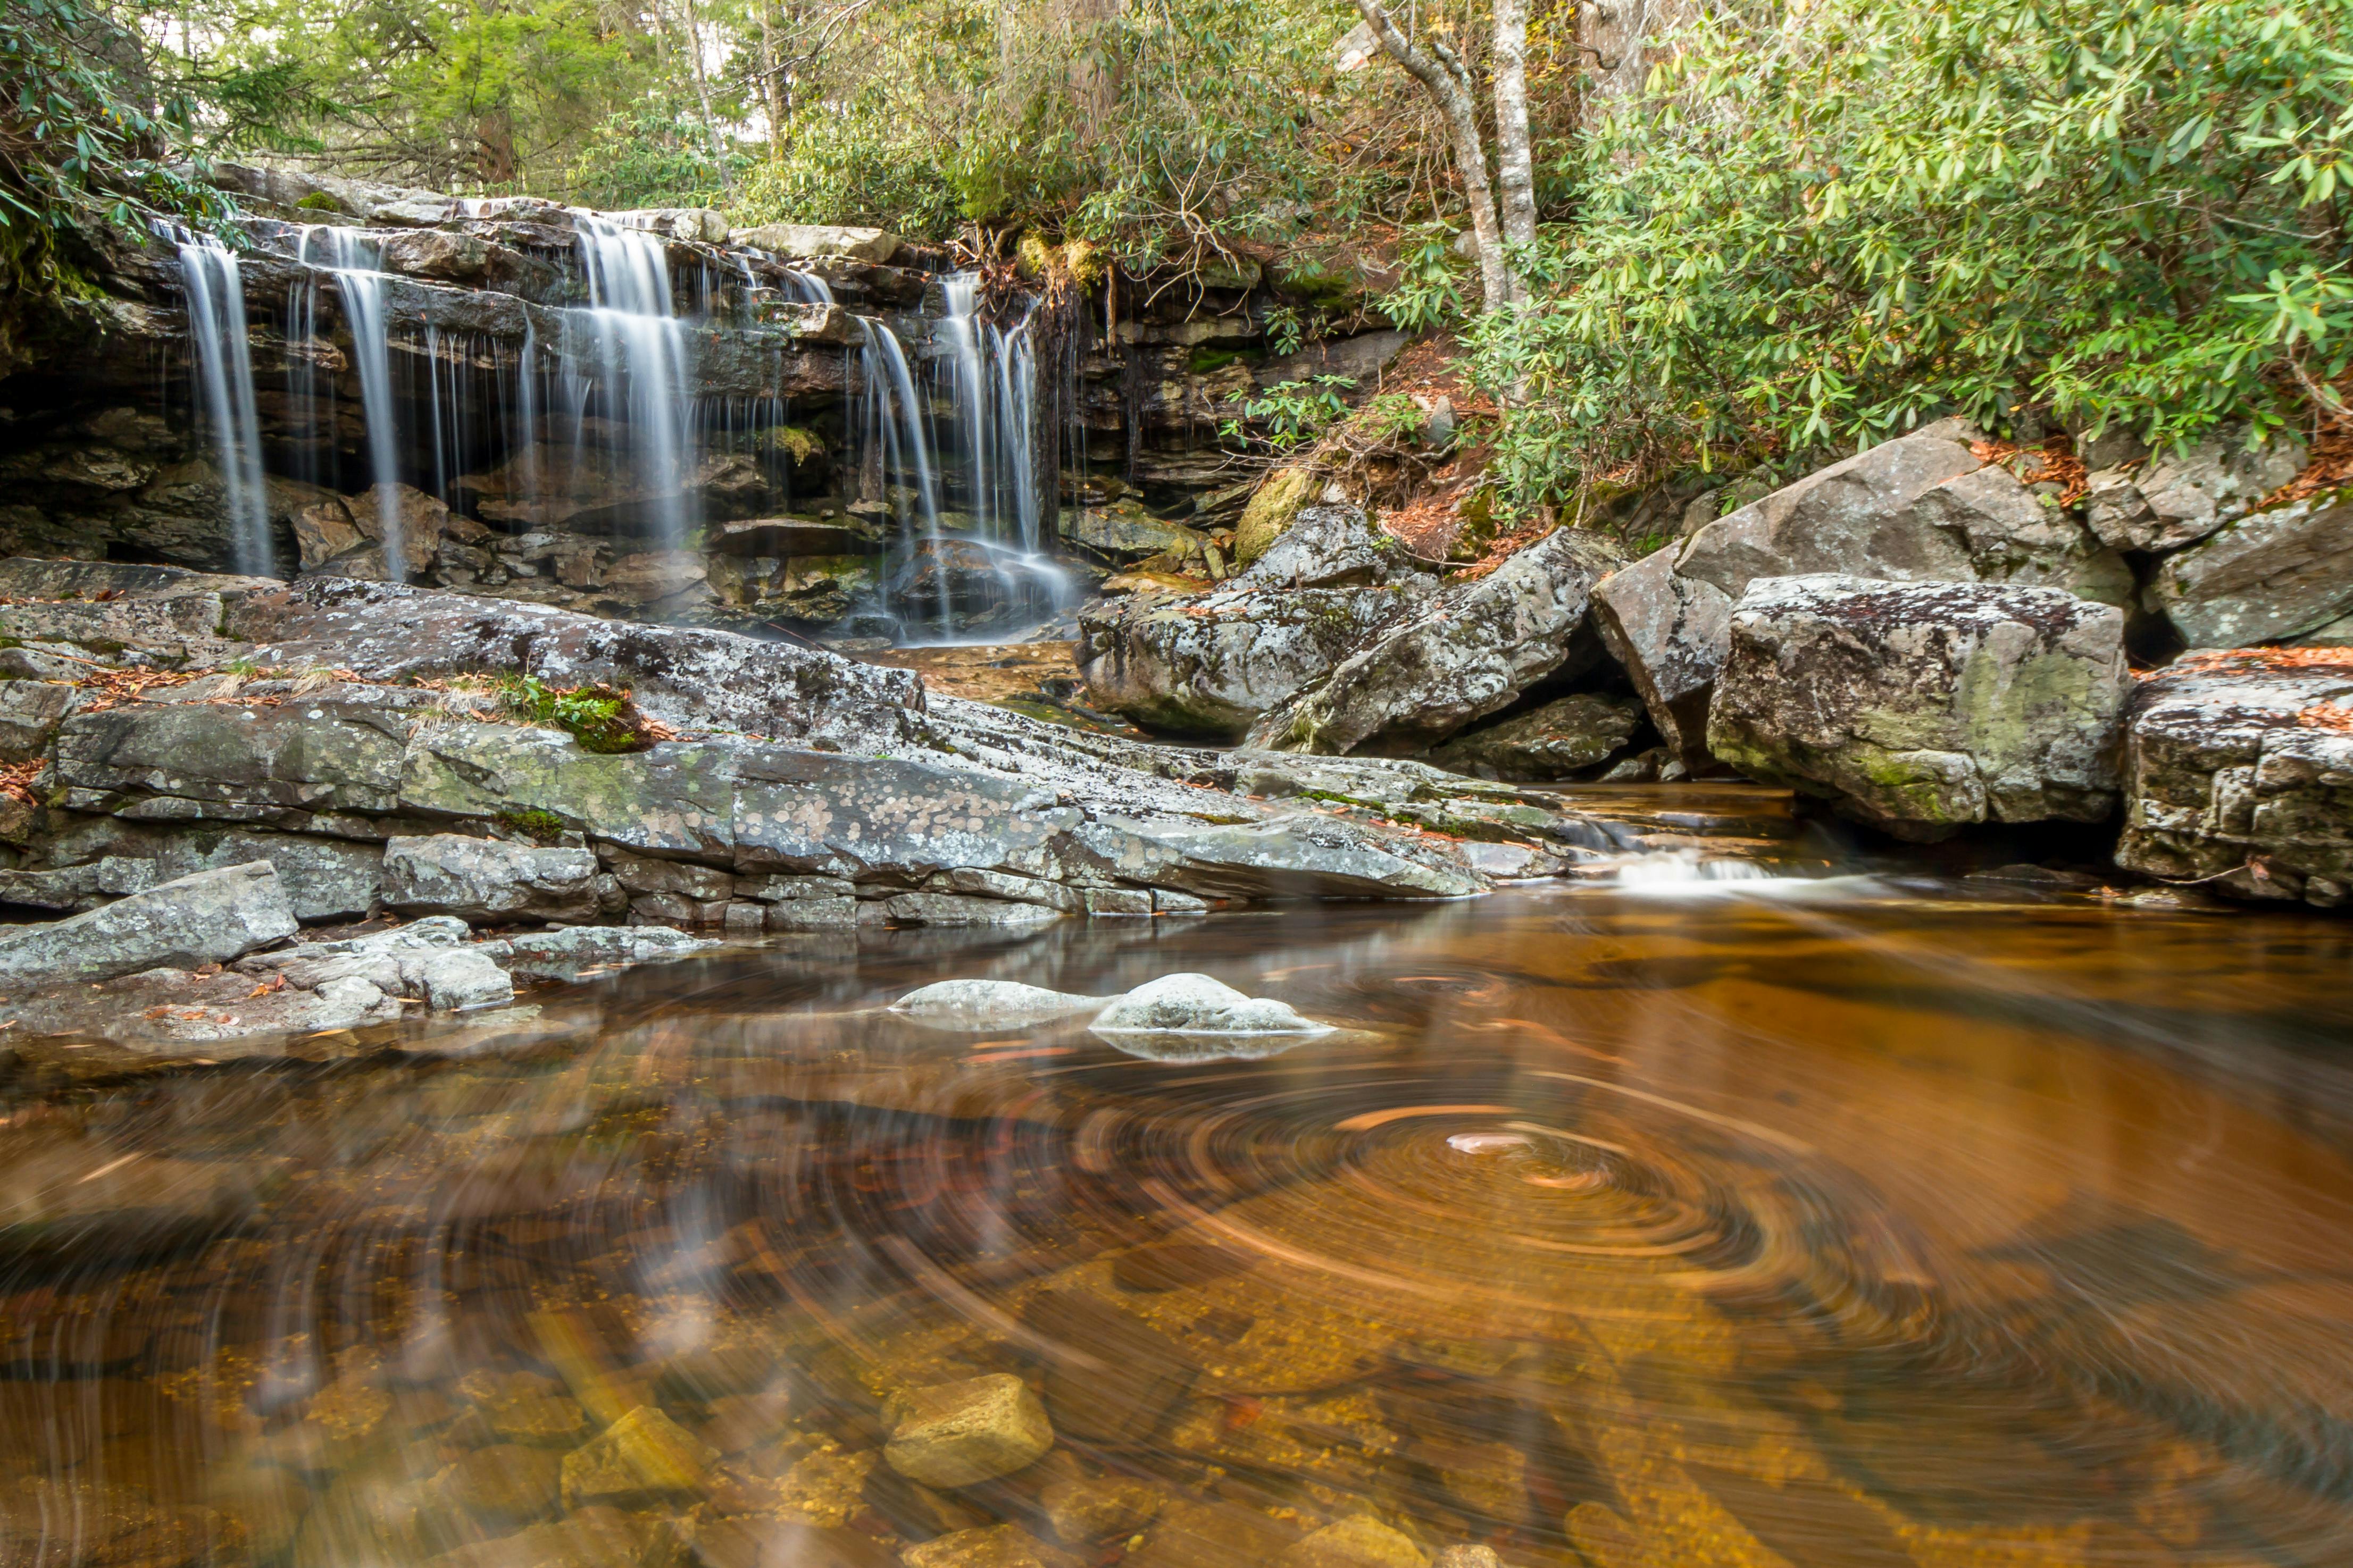 A waterfall pouring over rocks into a pool in Monongahela National Forest.